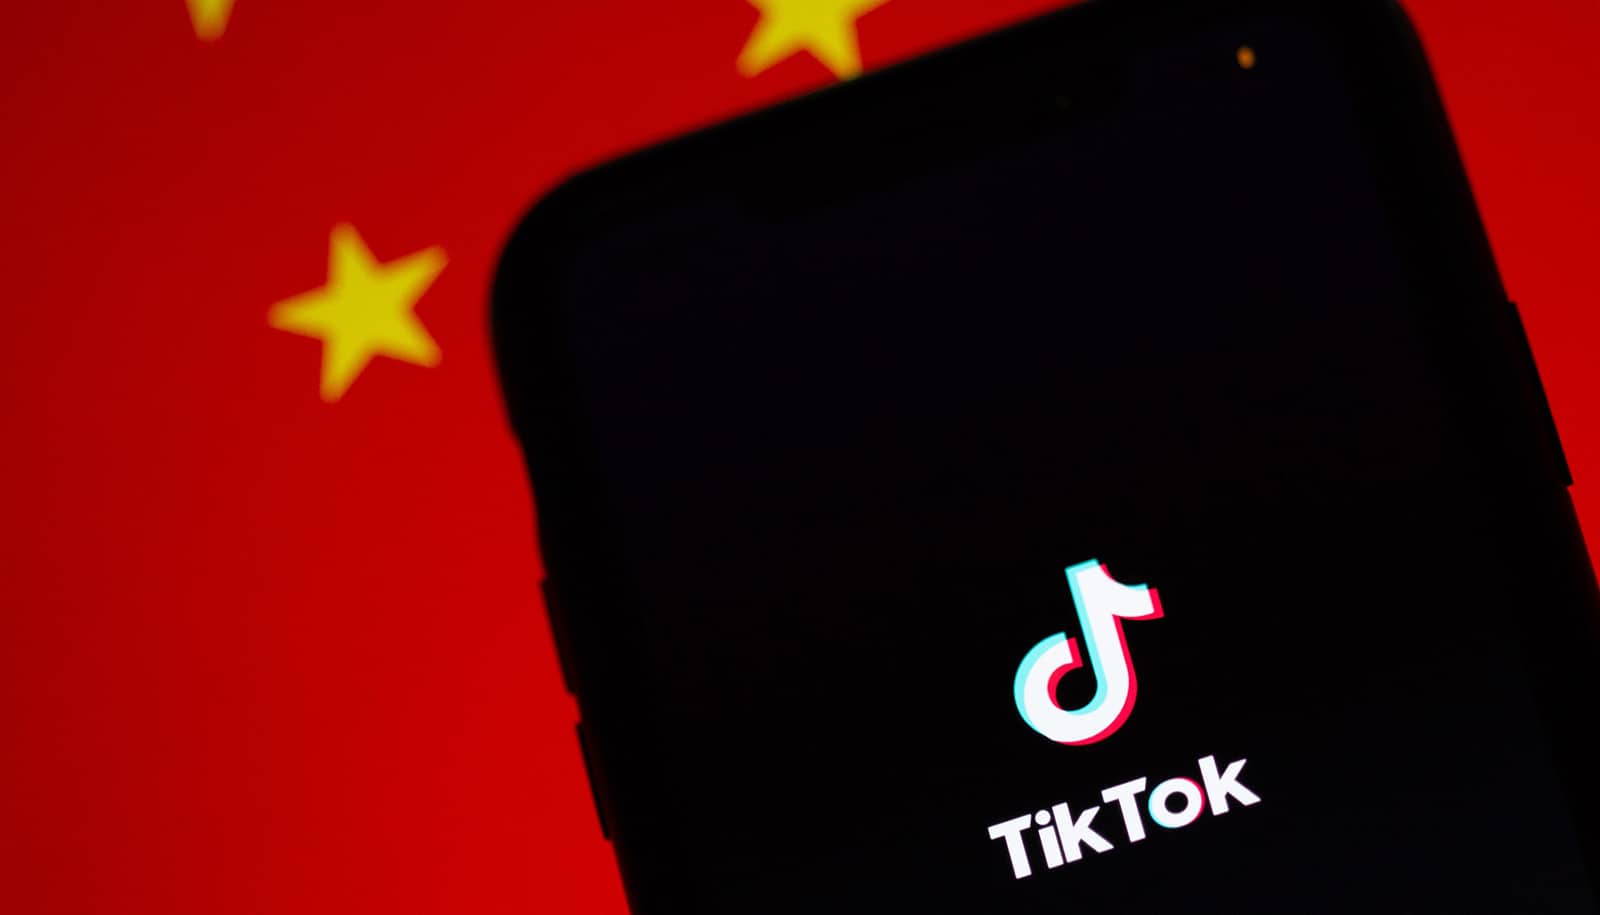 Expert: TikTok could be a risk to national security - Futurity